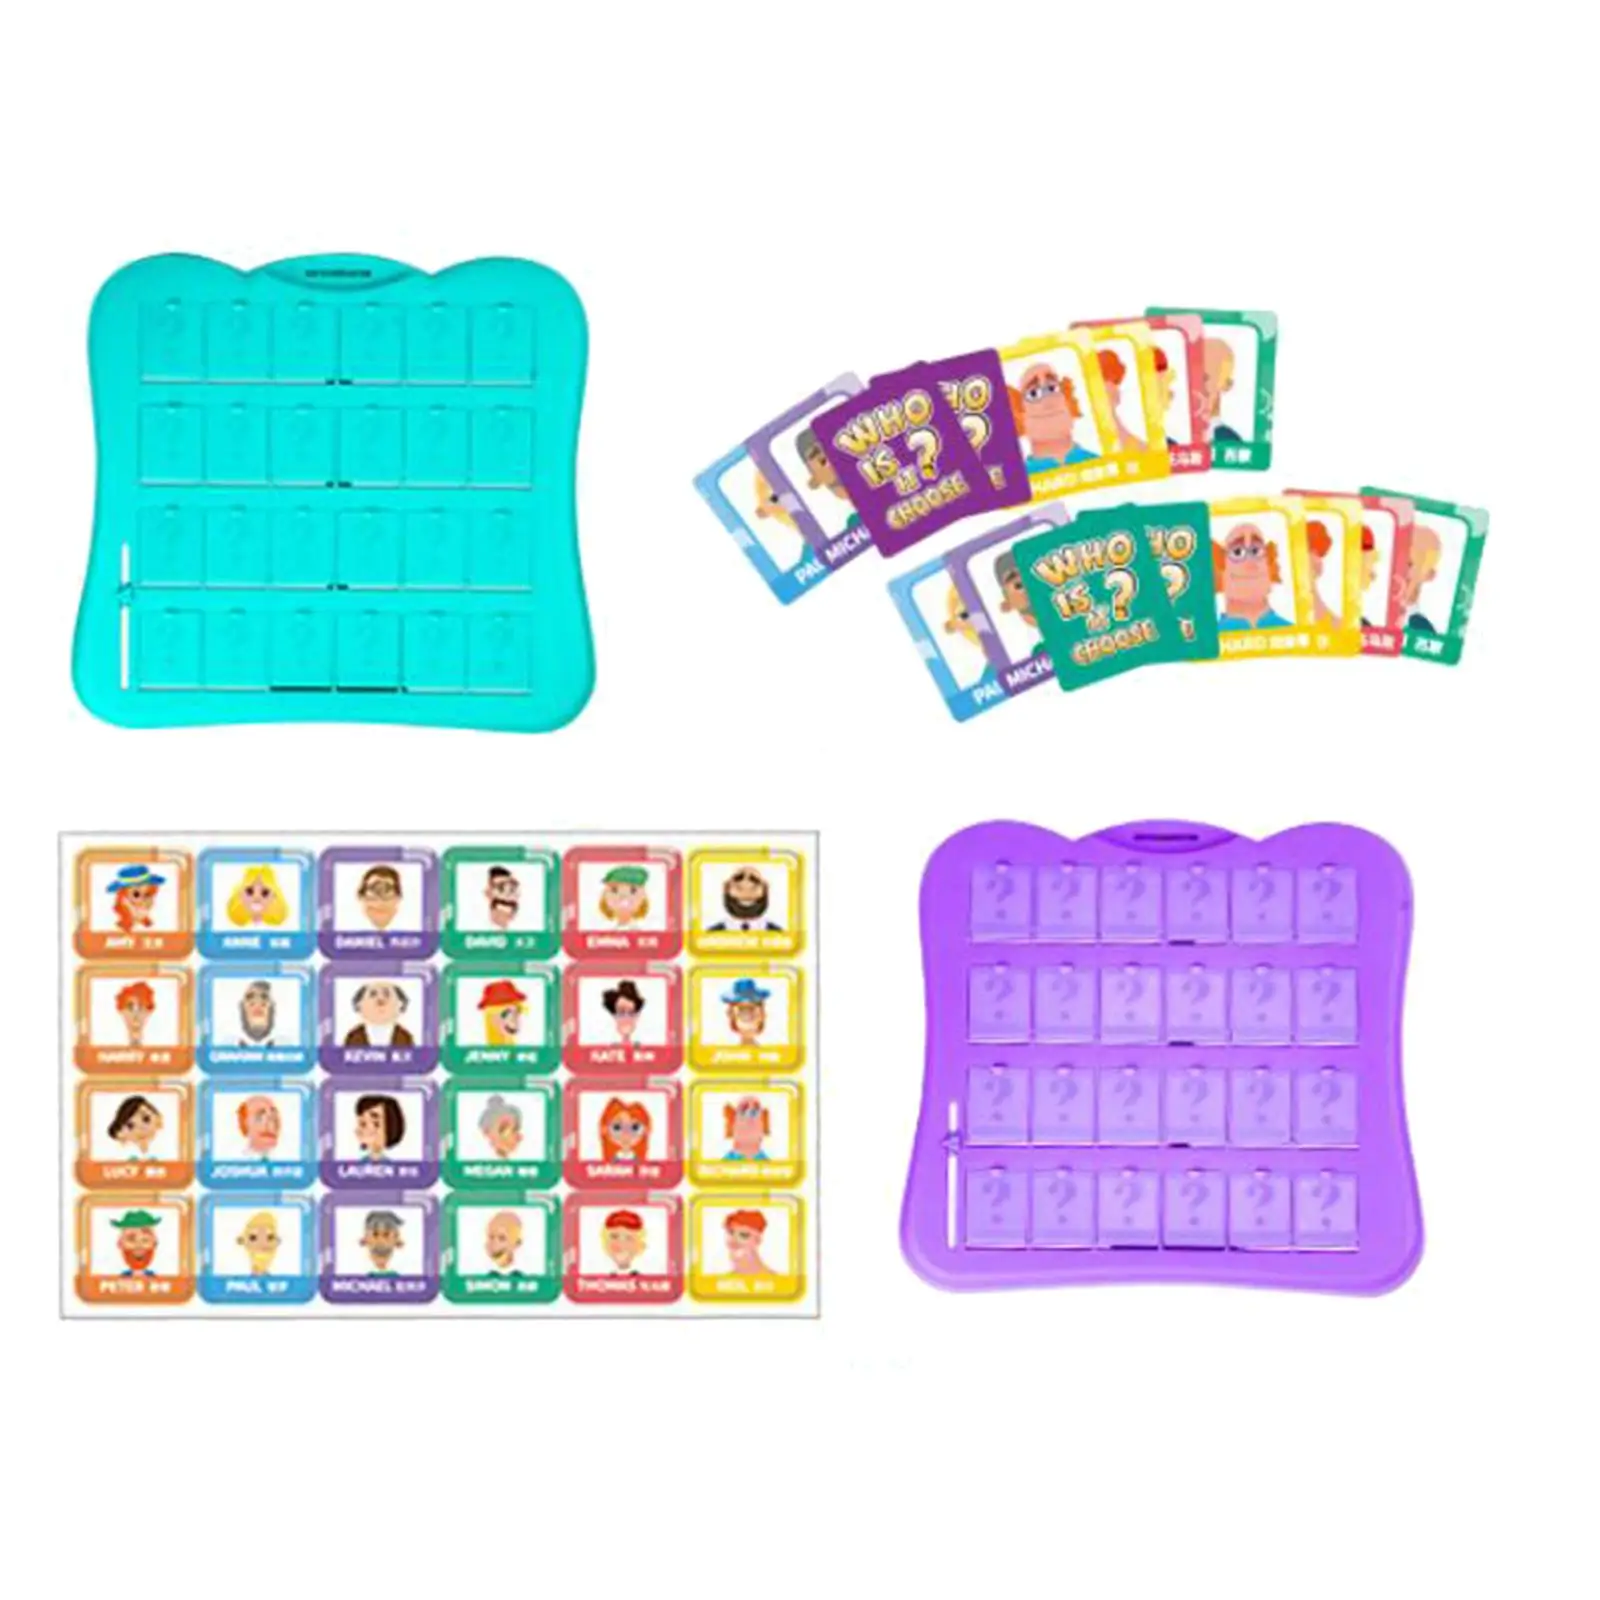 Guessing Who Game Valentines Day Gifts for Kids Classic Fun Reasoning Game for Travel Games Children Boys Party Prop Family Game